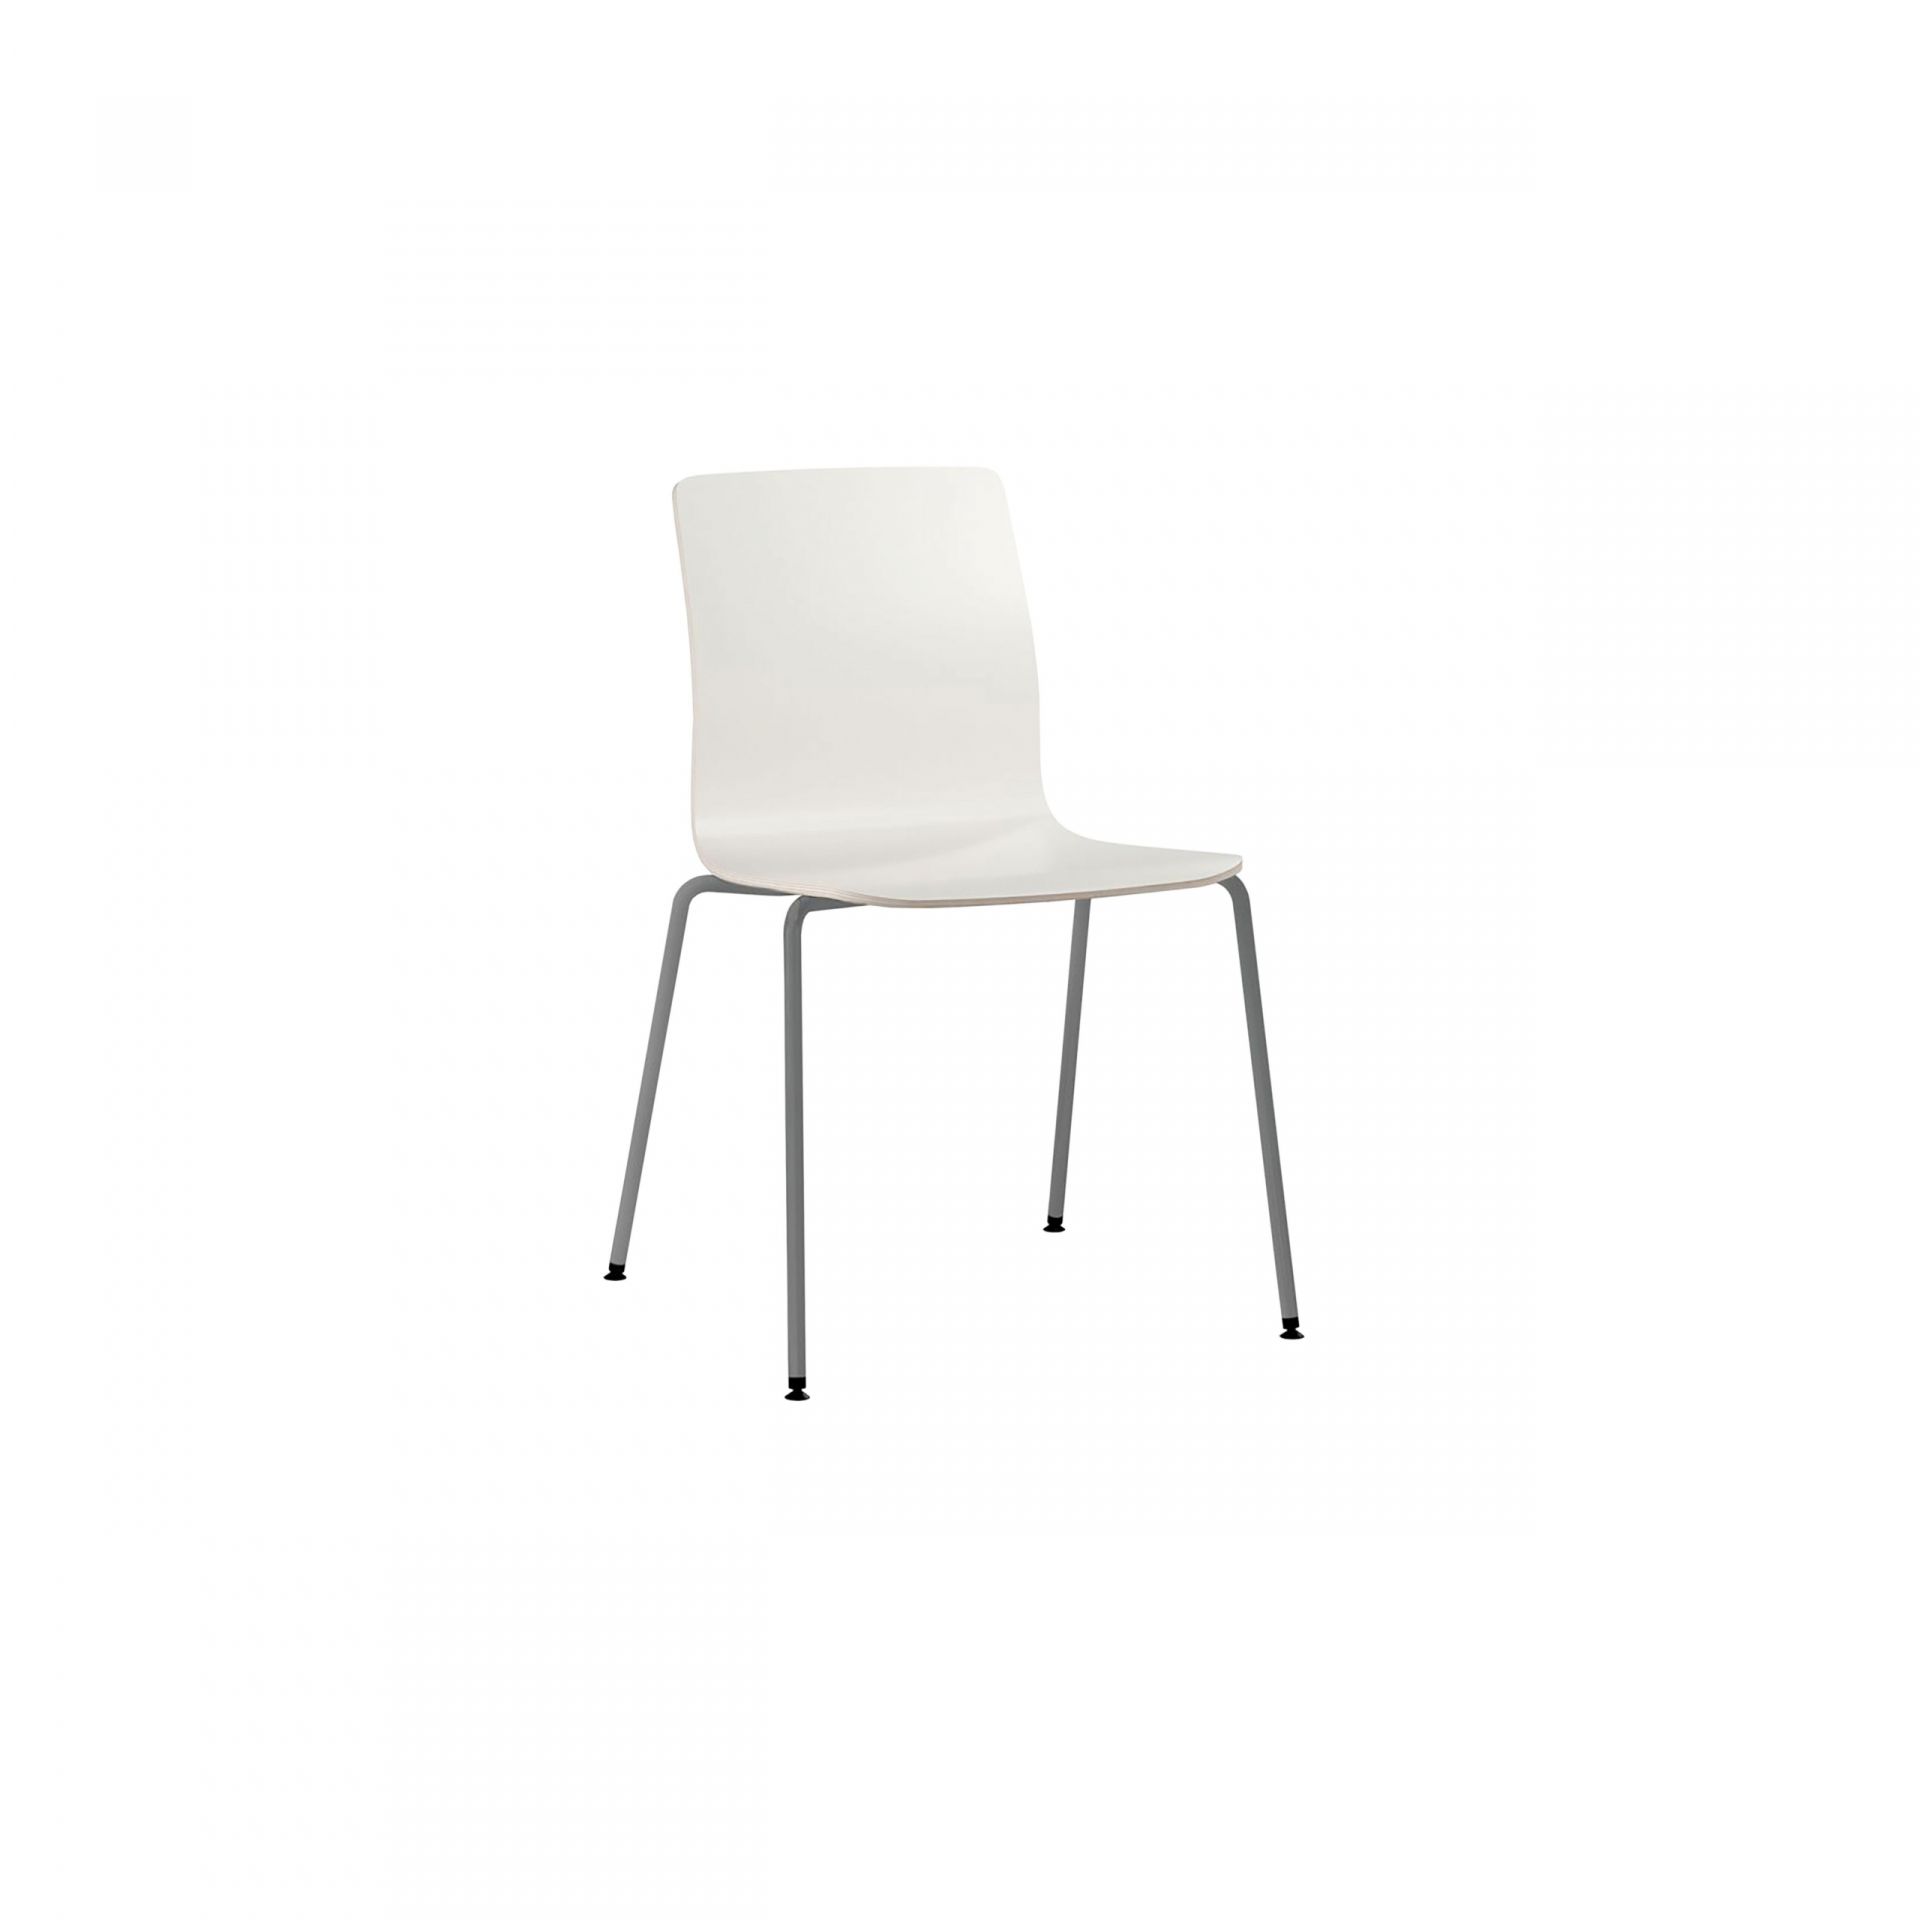 Nova Chair with metal legs product image 2